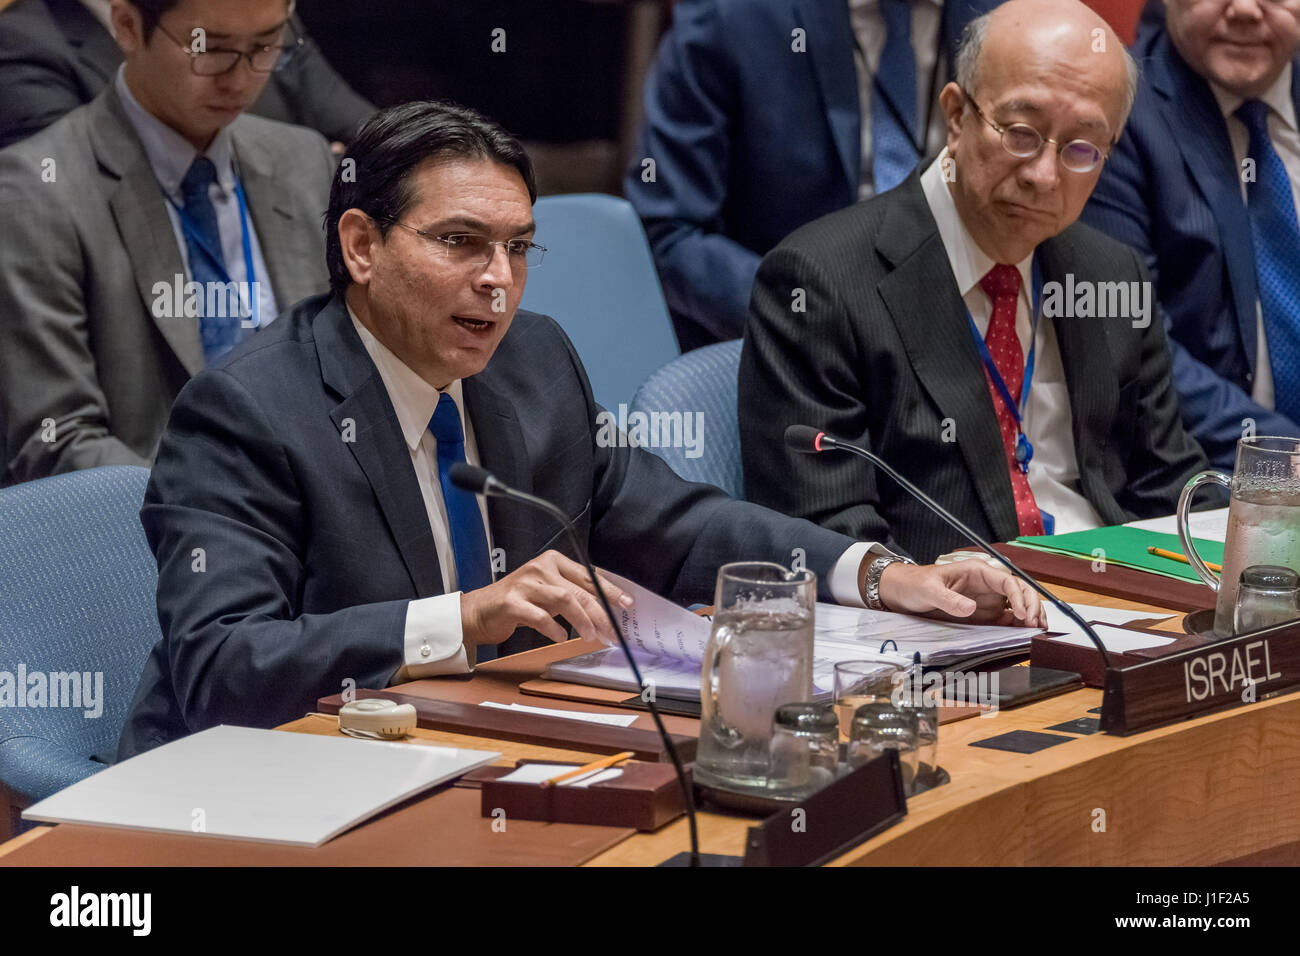 New York, USA. 20th Apr, 2017. Israeli Permanent Representative to the UN Ambassador Danny Danon is seen addressing the Council. The United Nations Security Council convened an open debate on the 'the situation in the Middle East, including the Palestinian question.” At the debate preside over by US Ambassador to the UN Nikki Haley, Council members heard a briefing from Nikolay Mladenov, the UN Special Coordinator for the Middle East Peace Process. Though monthly meetings on Palestine are a standard item in the Council's programme, upon assuming Presidency of the Council at the beginning of Ma Stock Photo